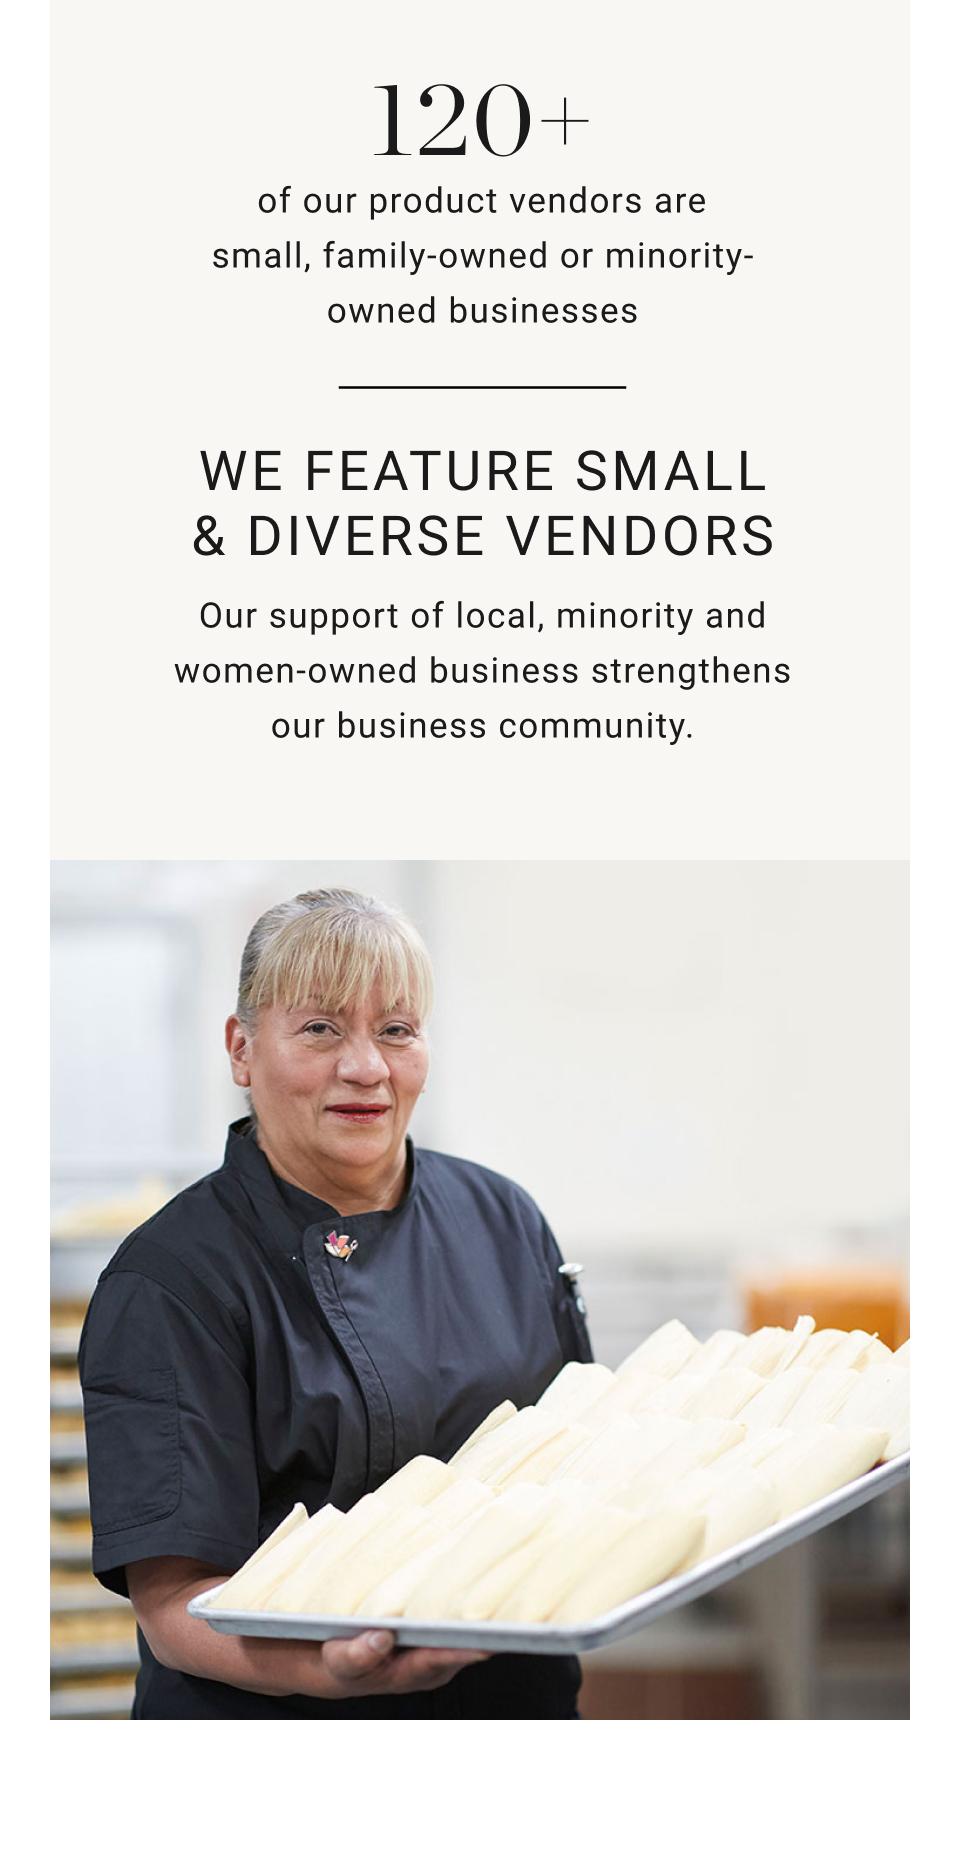 120+ of our vendors are snall, family-owned or minority-owned business. | Our support of local, minority and women-owned business strengthens our business community. | We Care About the Food You Feed Your Family. | We are committed to offering the best quality foods, made with the purest ingredients possible.